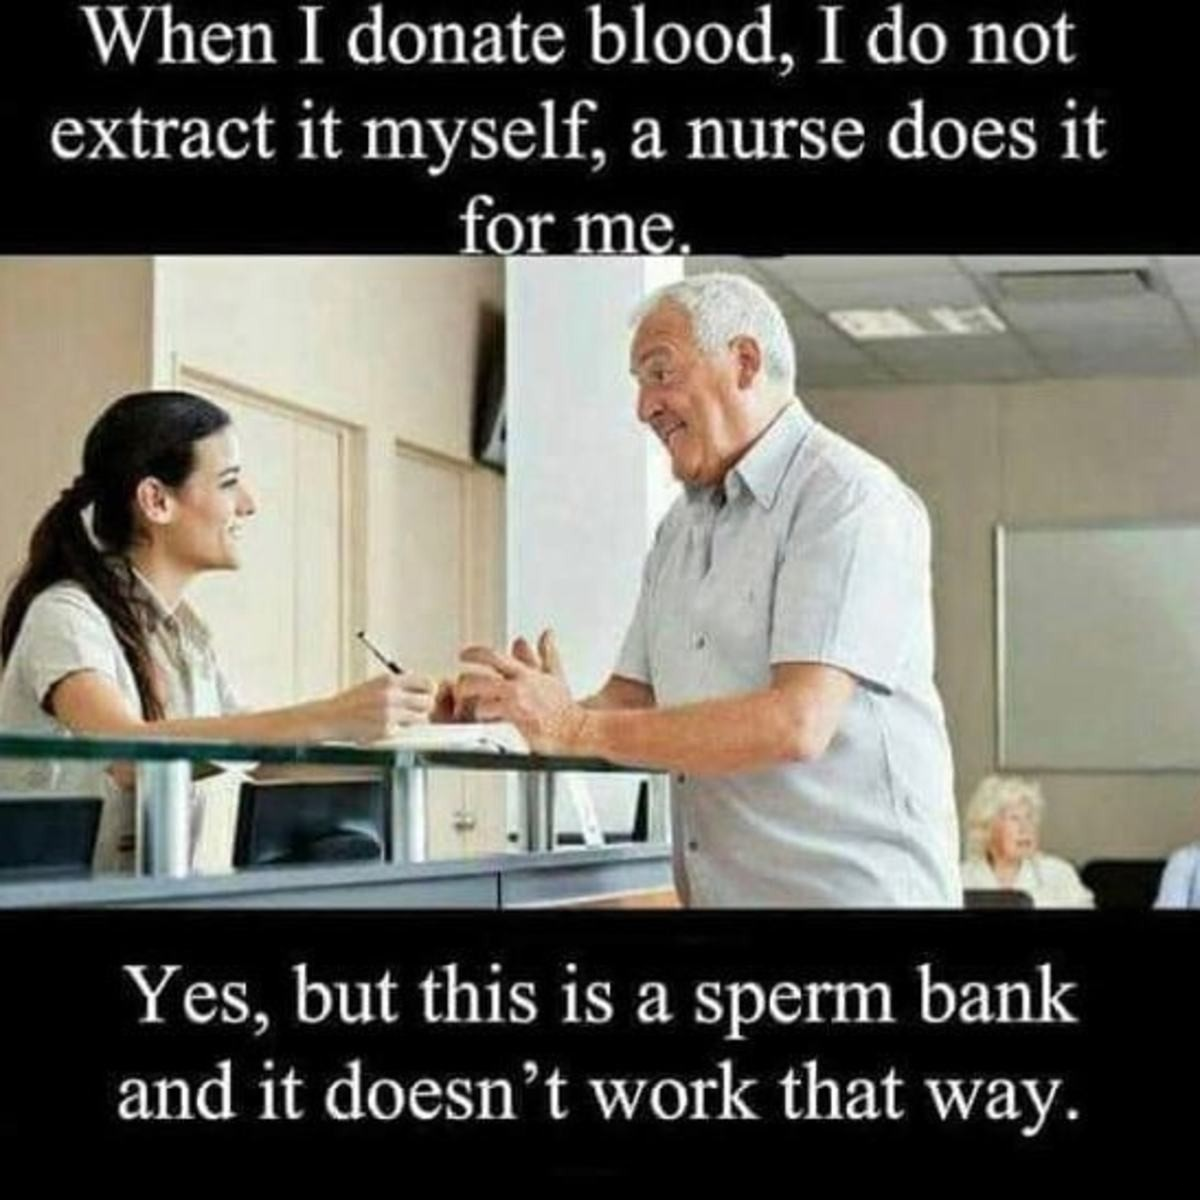 donate blood sperm bank - When I donate blood, I do not extract it myself, a nurse does it for me. Yes, but this is a sperm bank and it doesn't work that way.